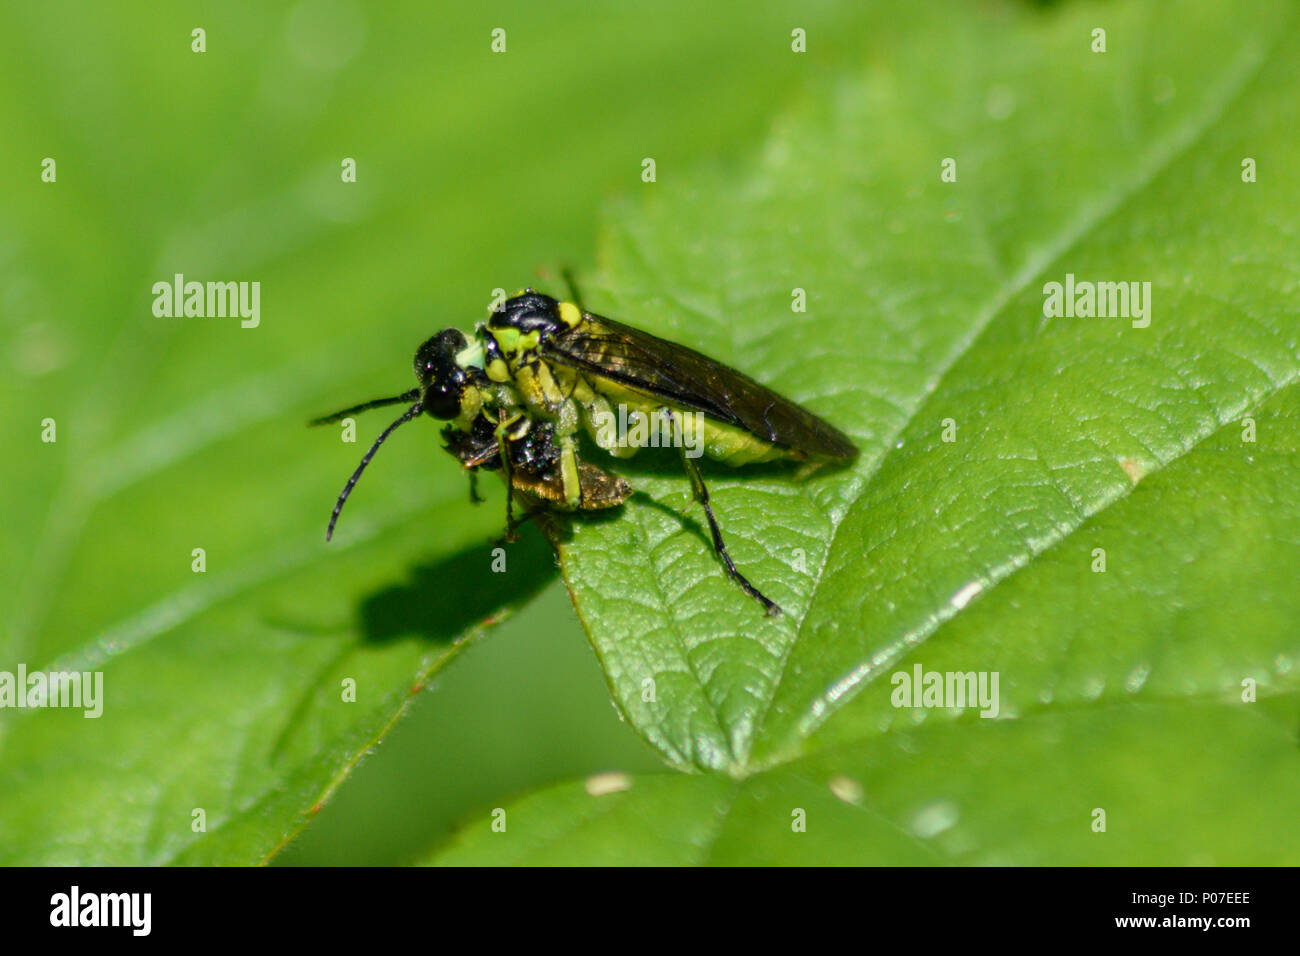 Green Sawfly consuming another small insect Stock Photo